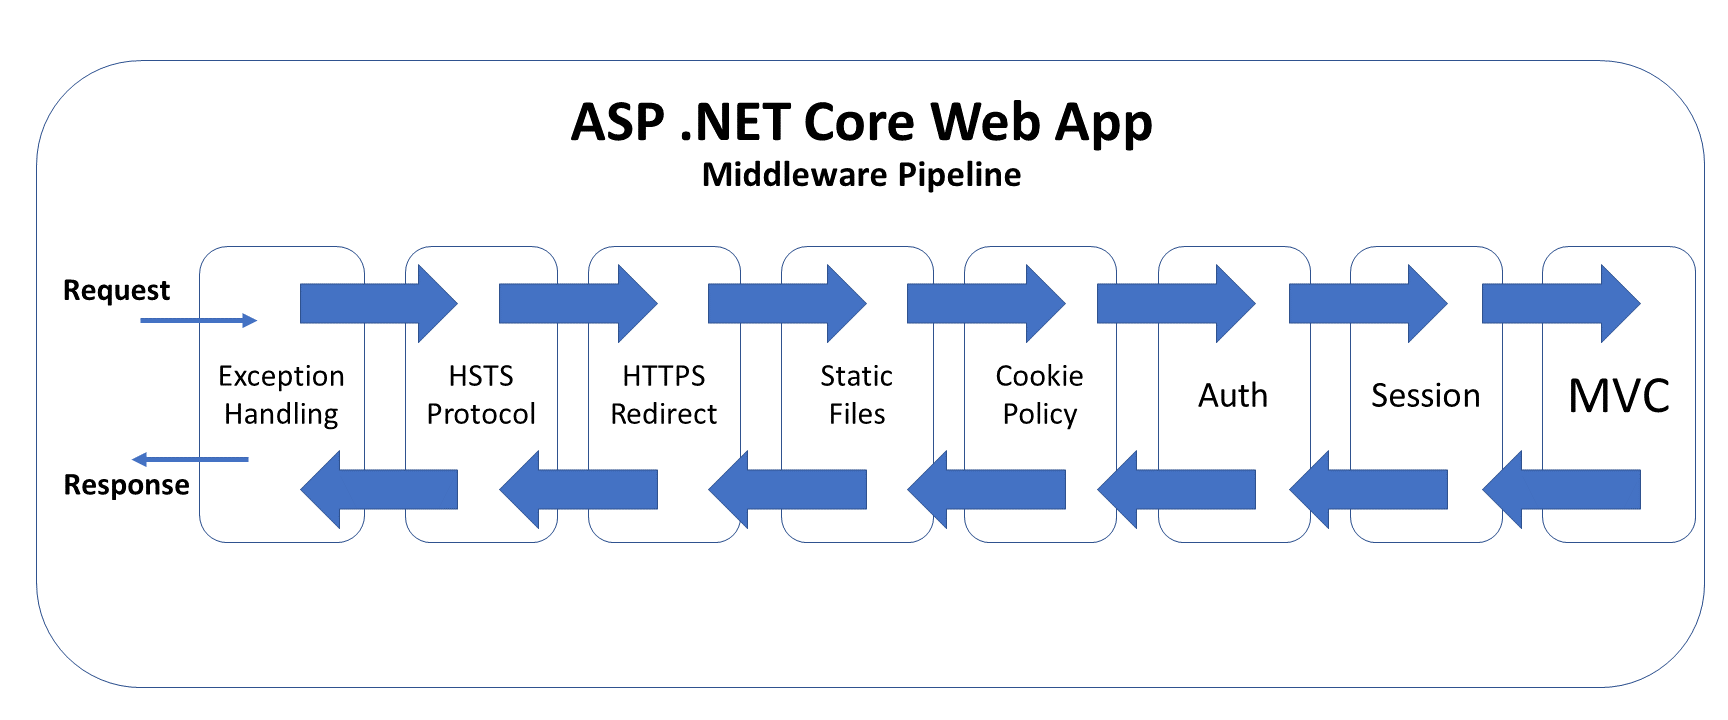 M is for Middleware in ASP .NET Core.